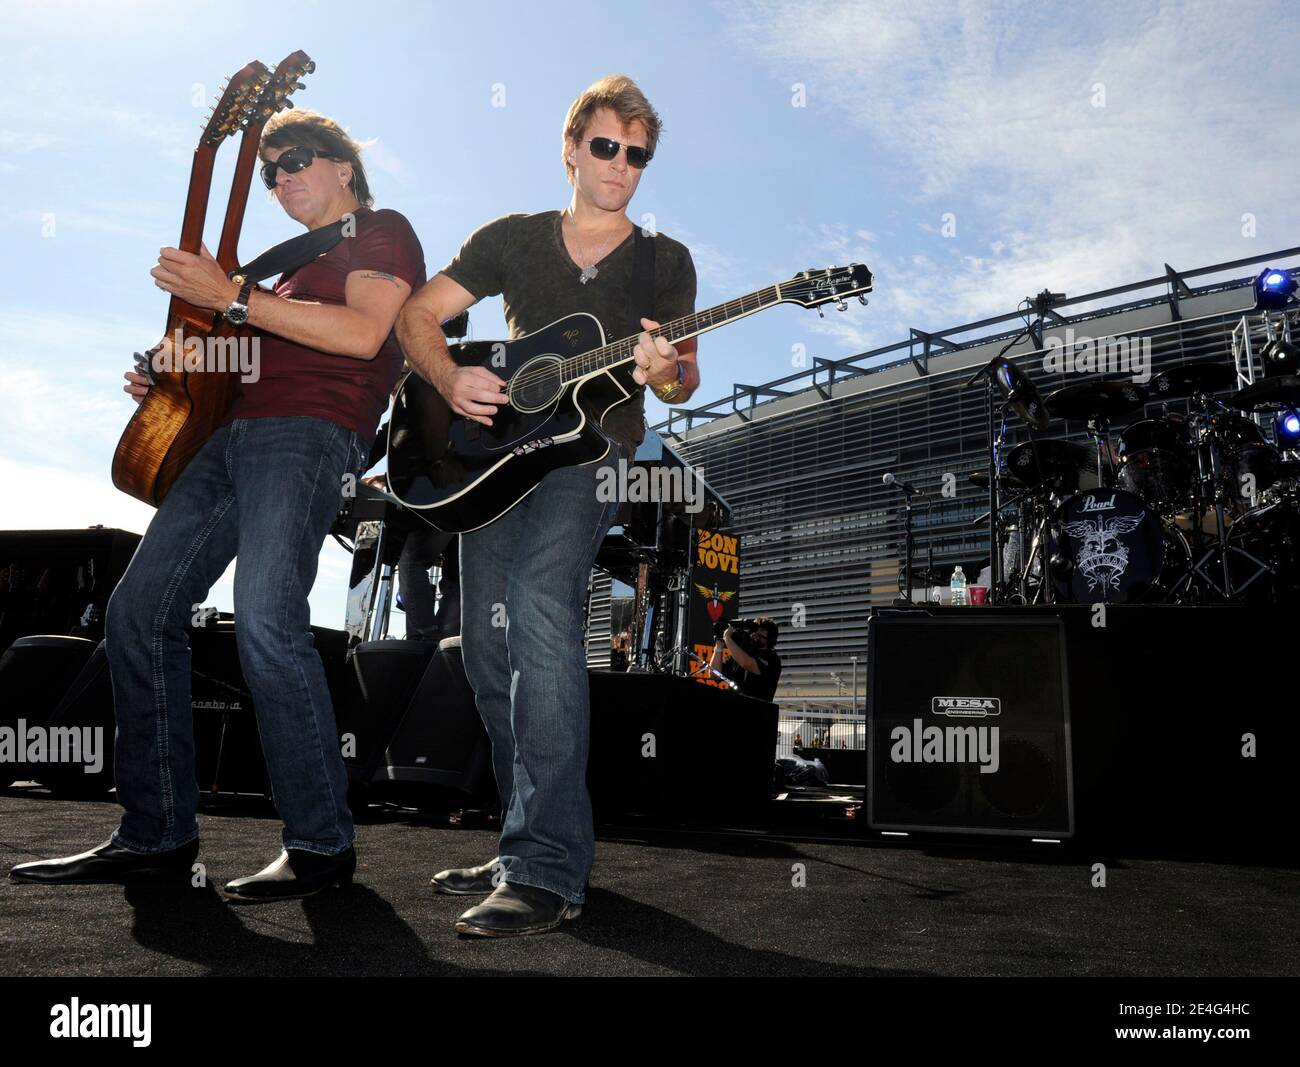 Bon Jovi guitarist Richie Sambora (L) and lead singer Jon Bon Jovi performing during the concert outside the new Meadowlands Stadium during a special concert/media event in the Meadowlands, NJ, USA on October 22, 2009. Photo by Fernando Leon/ABACAPRESS.COM Stock Photo